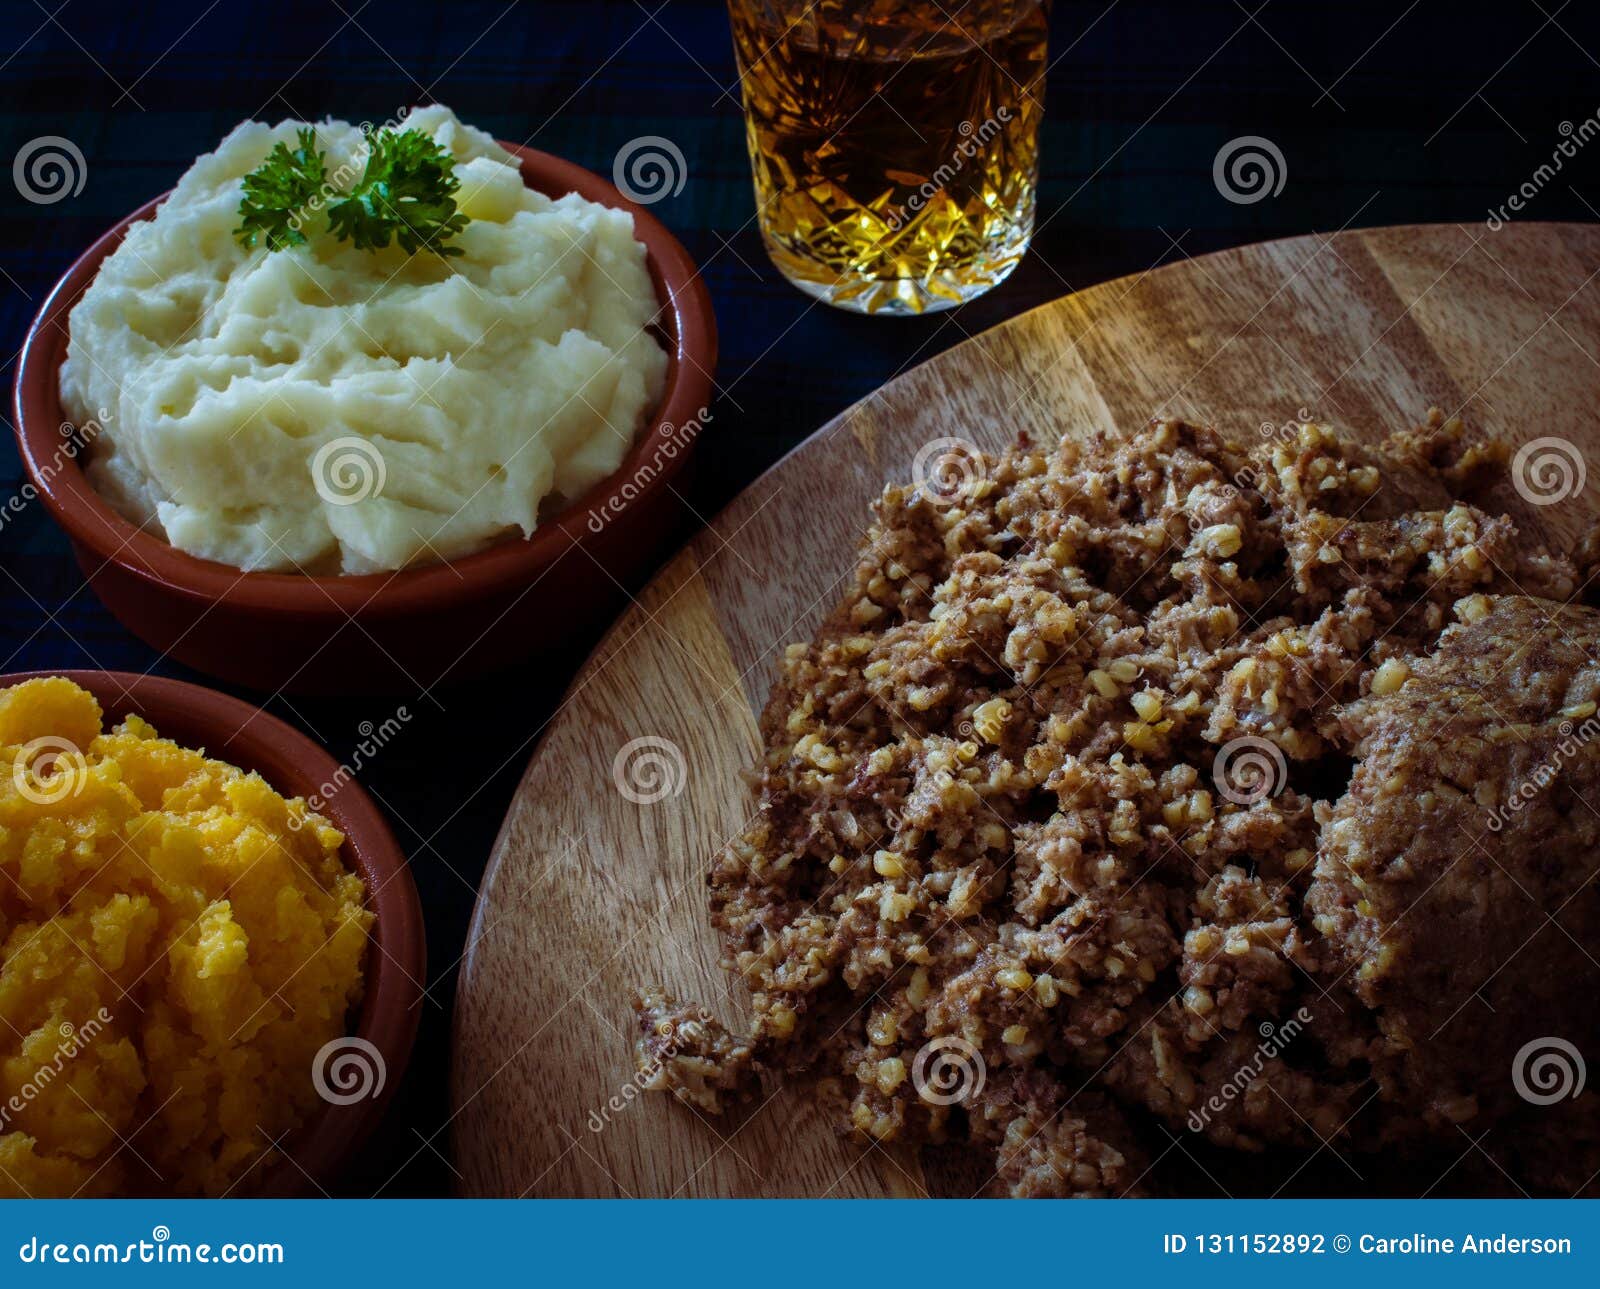 haggis, with mashed potatoes, mashed swede and a wee dram of scotch whiskey. burns night, scotland